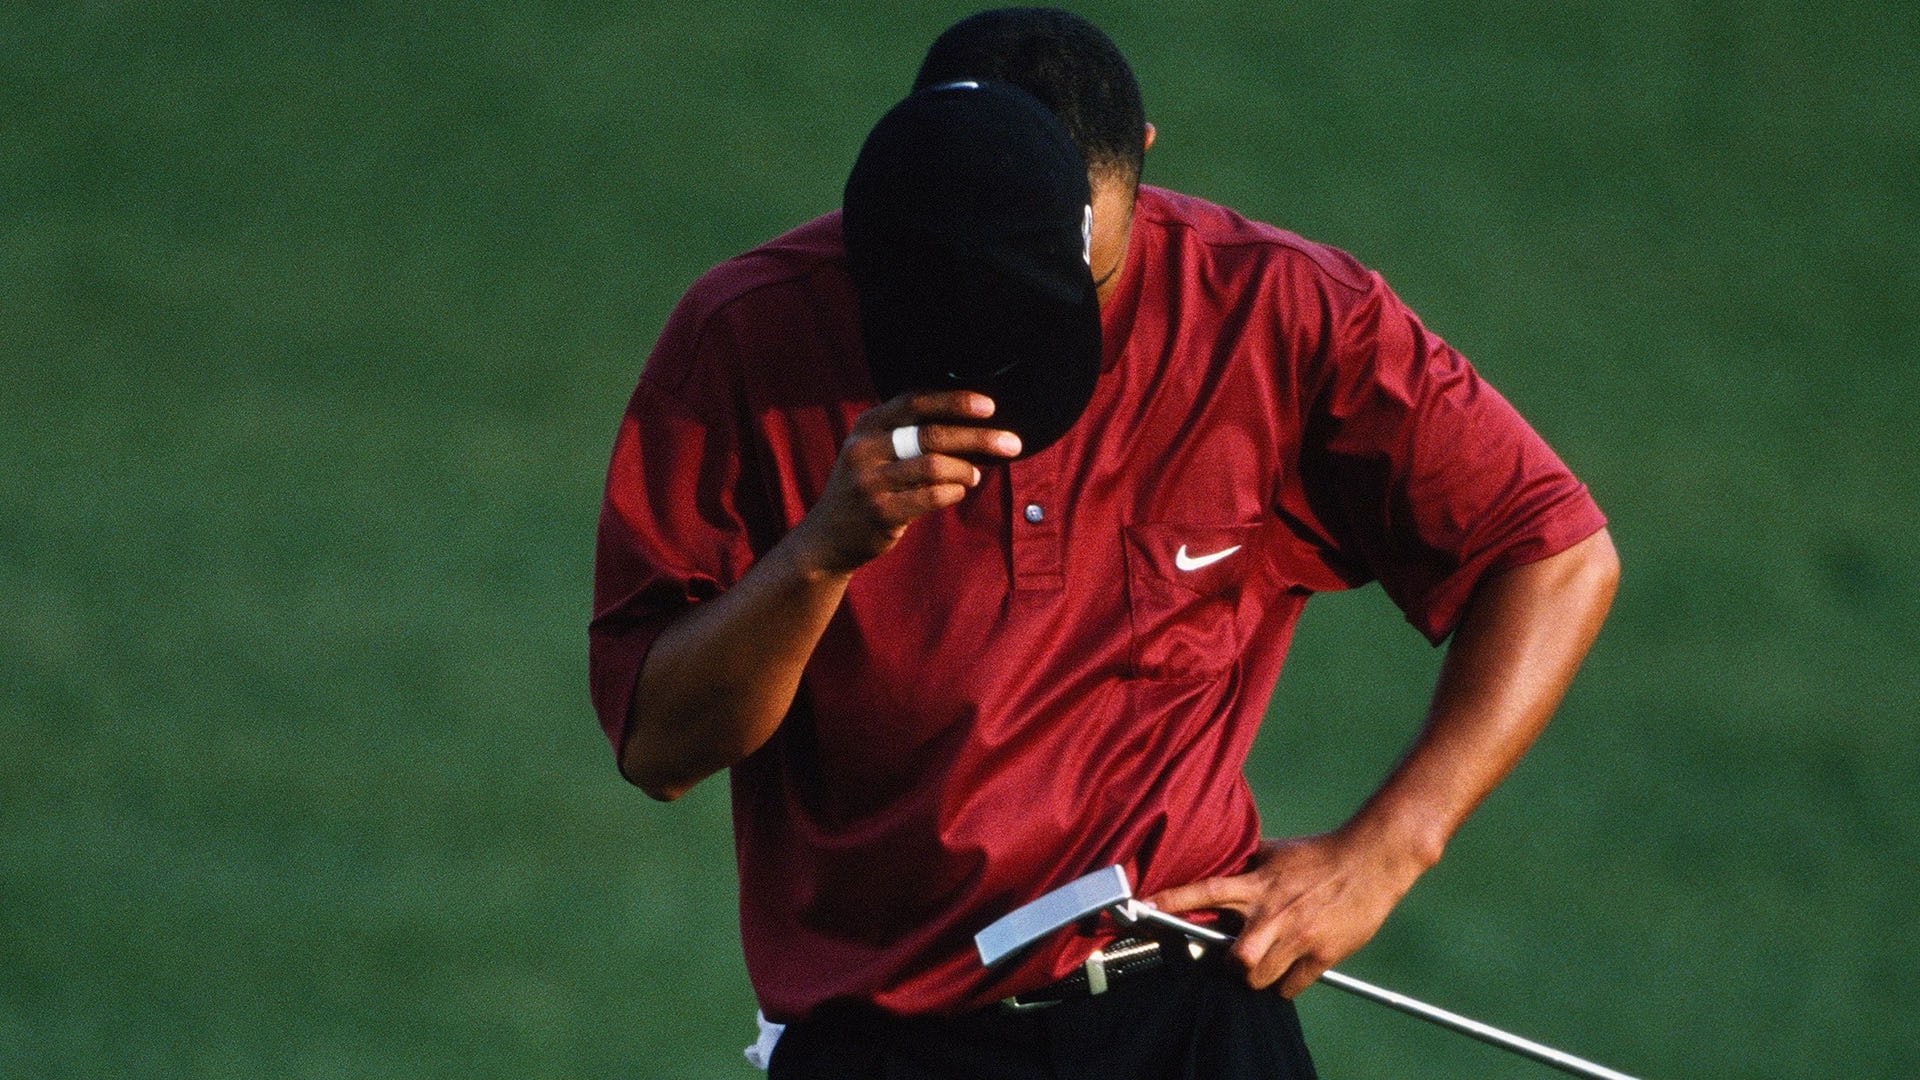 As Tiger Woods covered his face in victory, so too did so many others in defeat